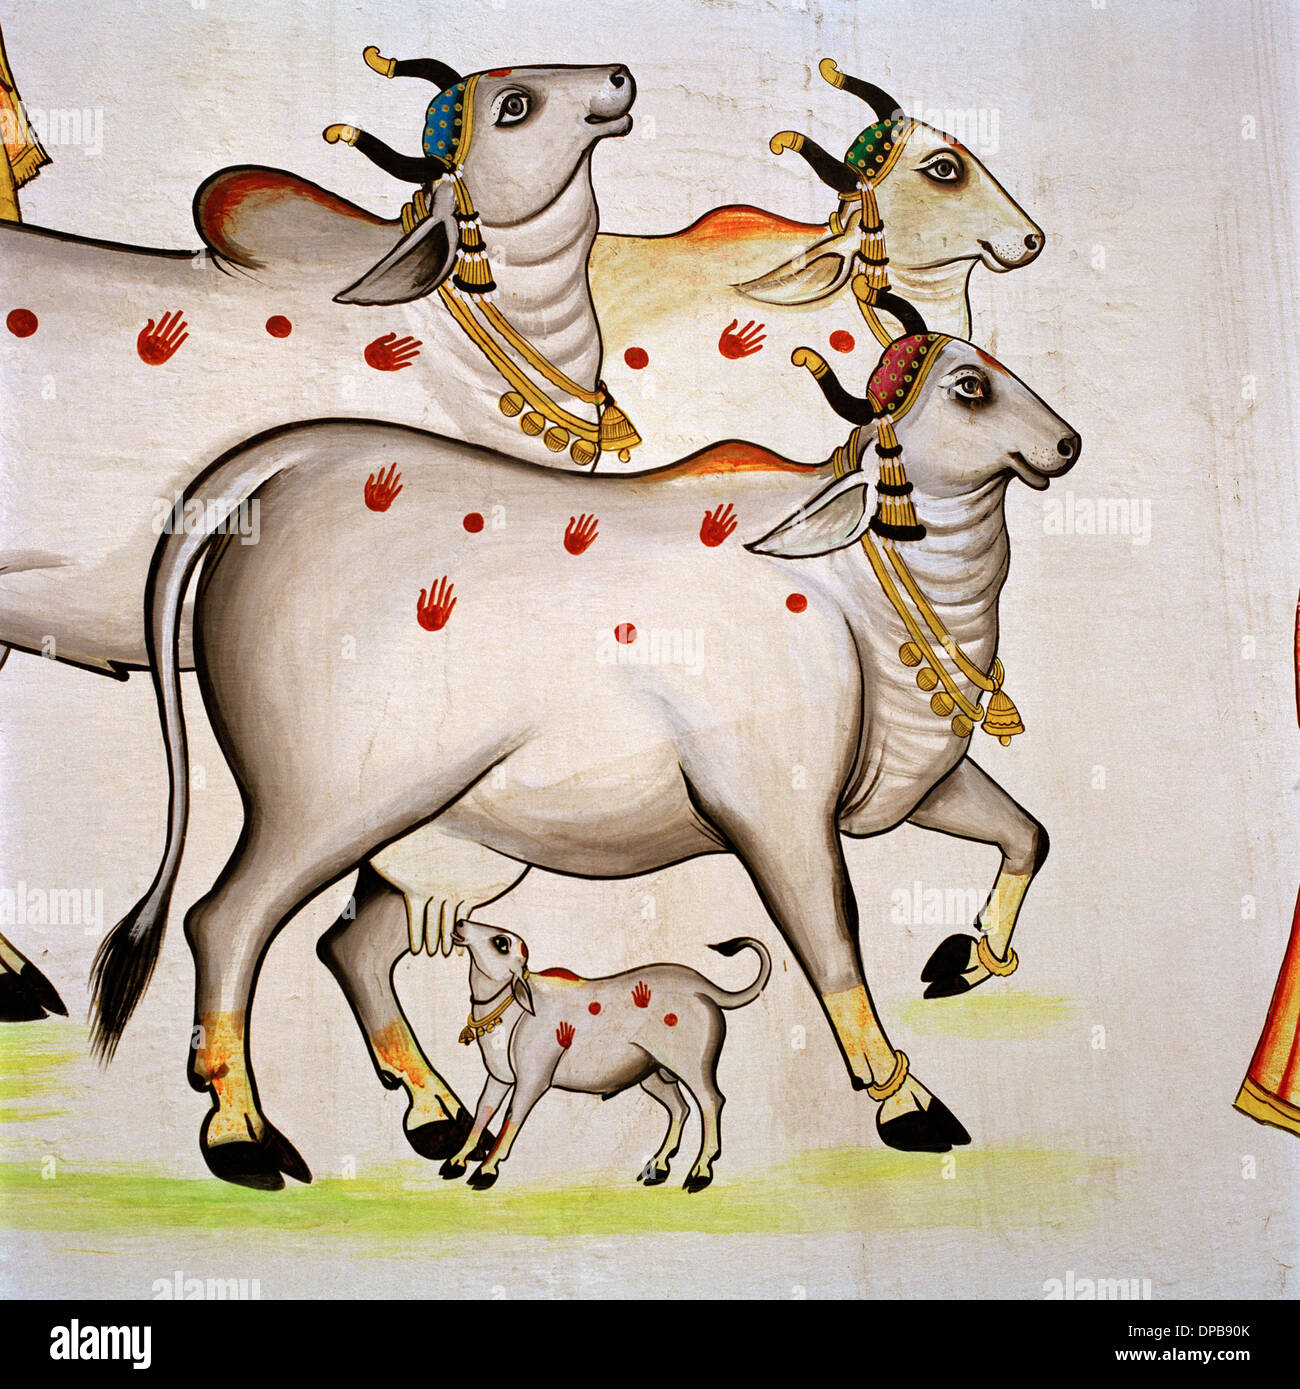 Street Hindu art in Udaipur in Rajasthan in India in South Asia. Image Religious Religion Cow Cows Sacred Travel Wanderlust Stock Photo